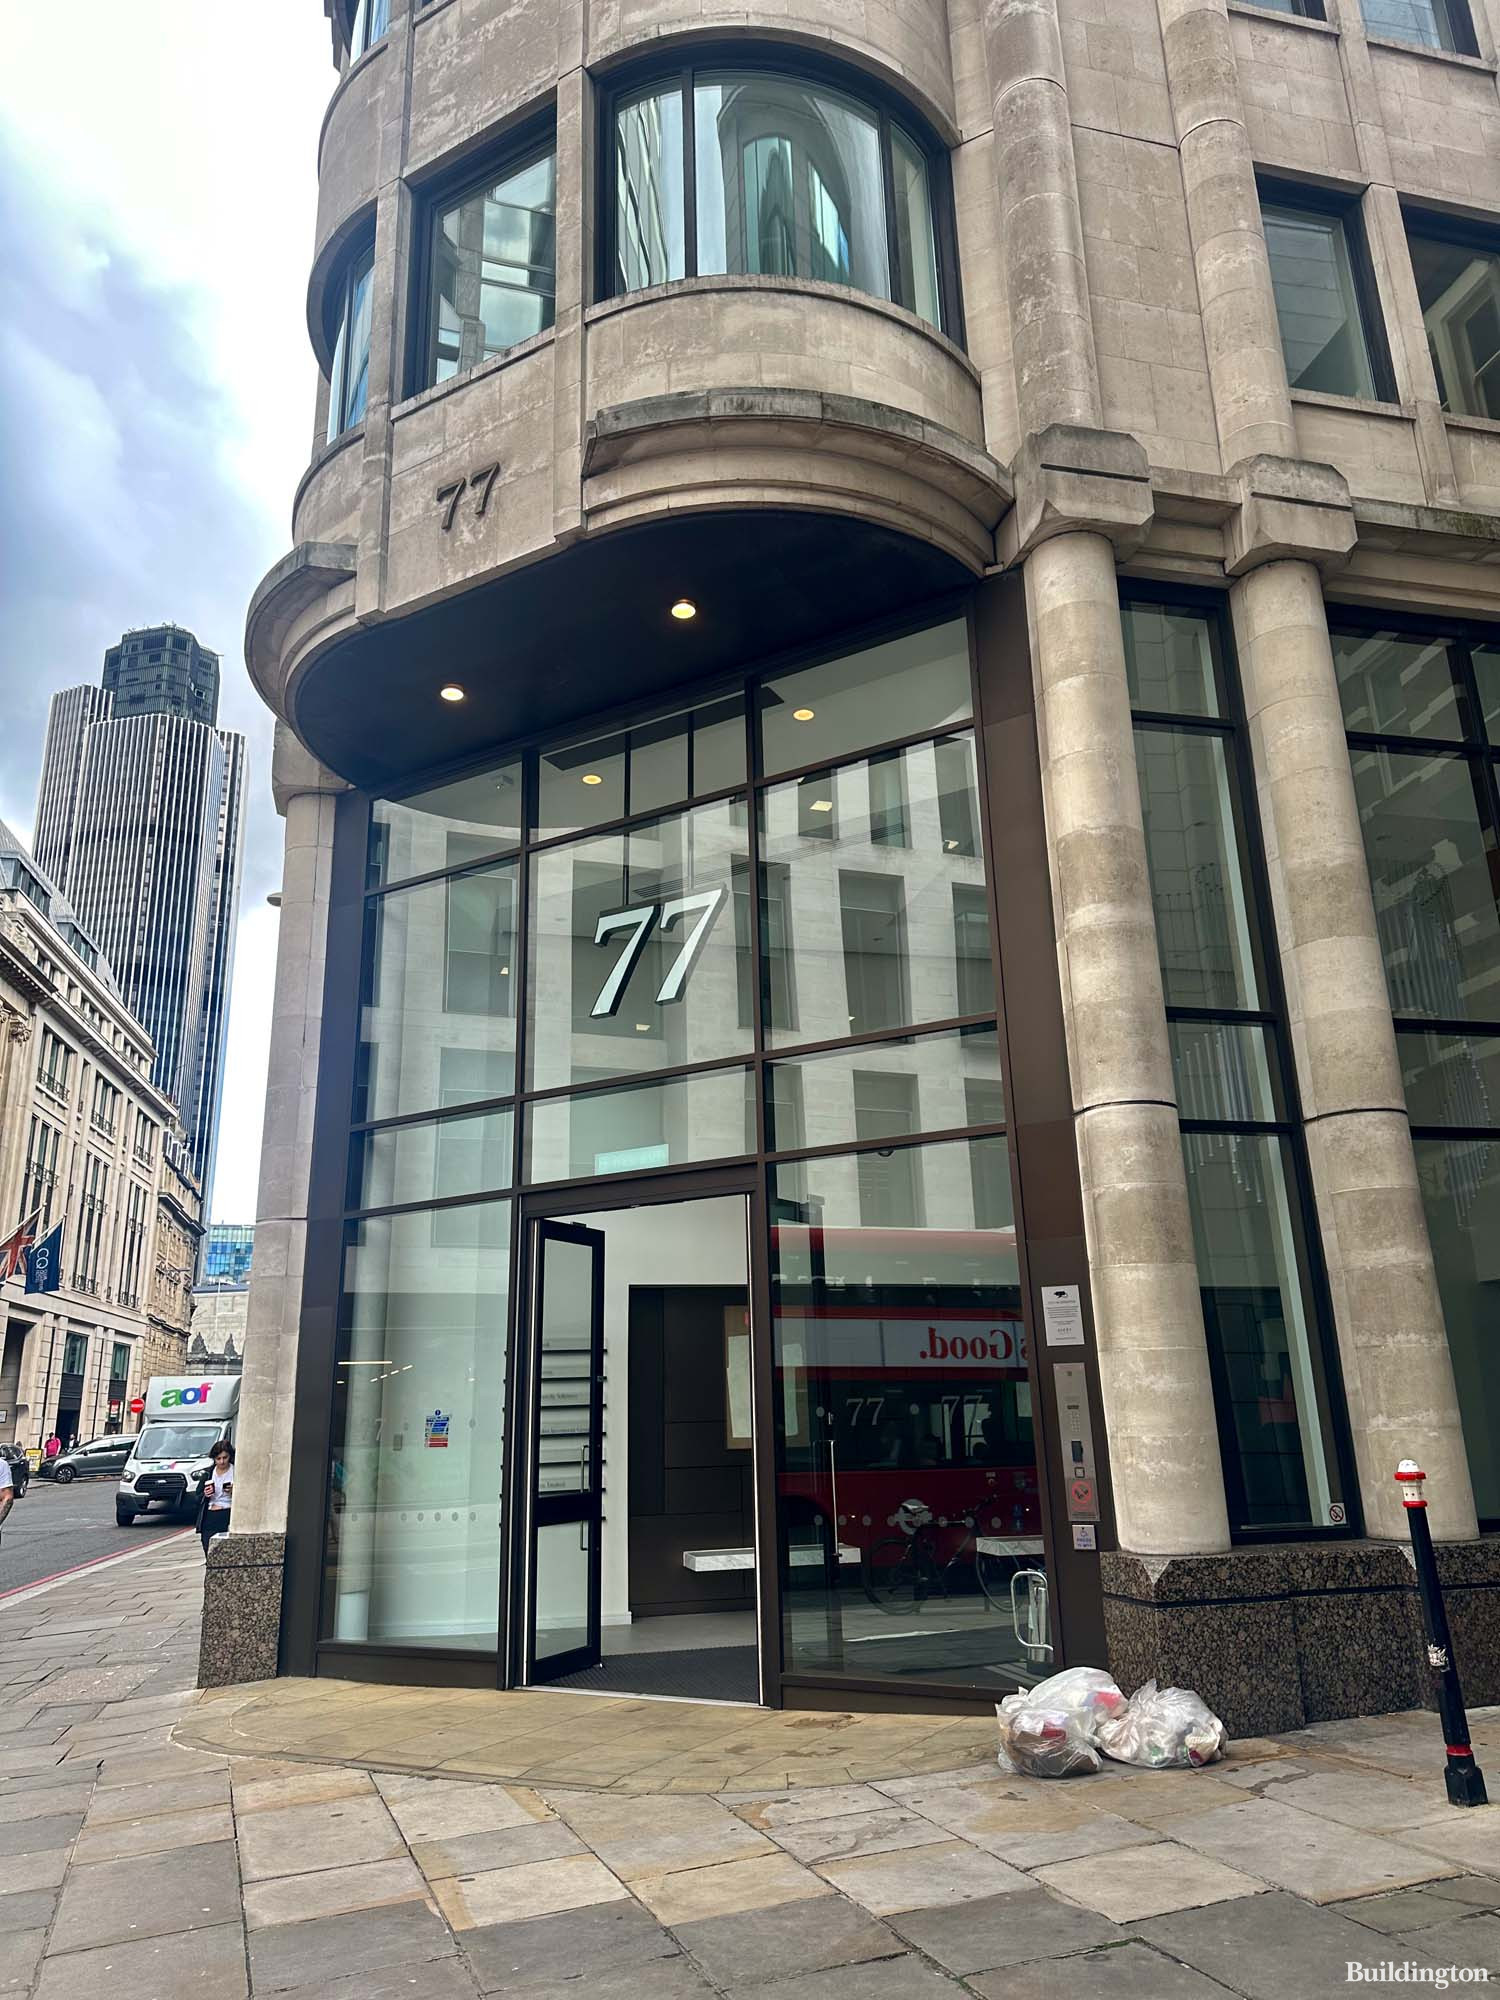 Entrance to 77 Gracechurch Street in the City of London EC3.